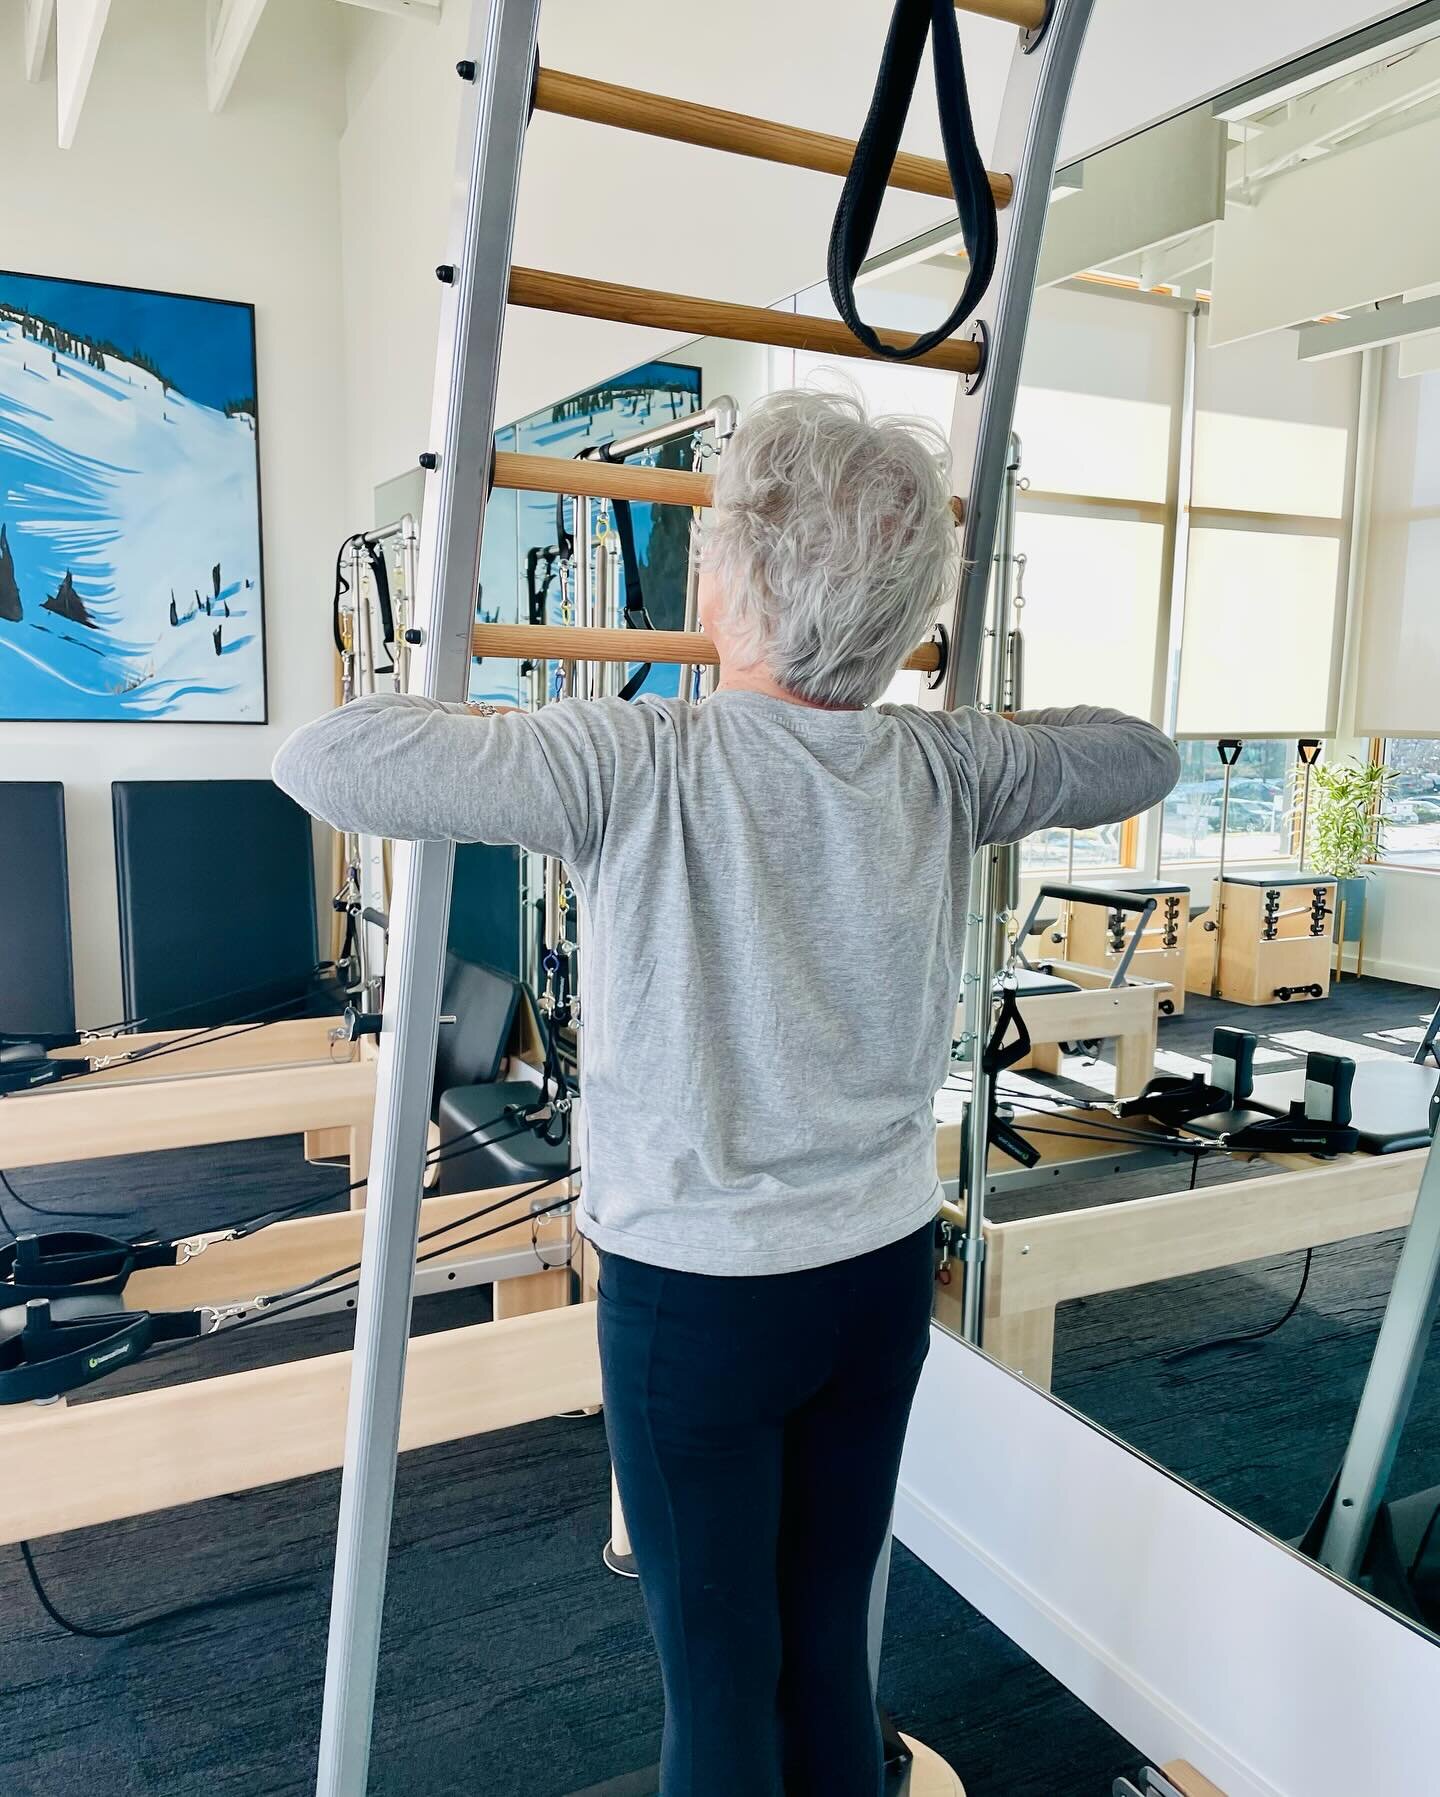 Cindy began taking Gyrotonic sessions in November, with the hope that it might help relieve her symptoms of lymphedema. She had breast cancer and a common result of the treatment is lymphedema, or swelling caused by damage to or removal of the lymph 